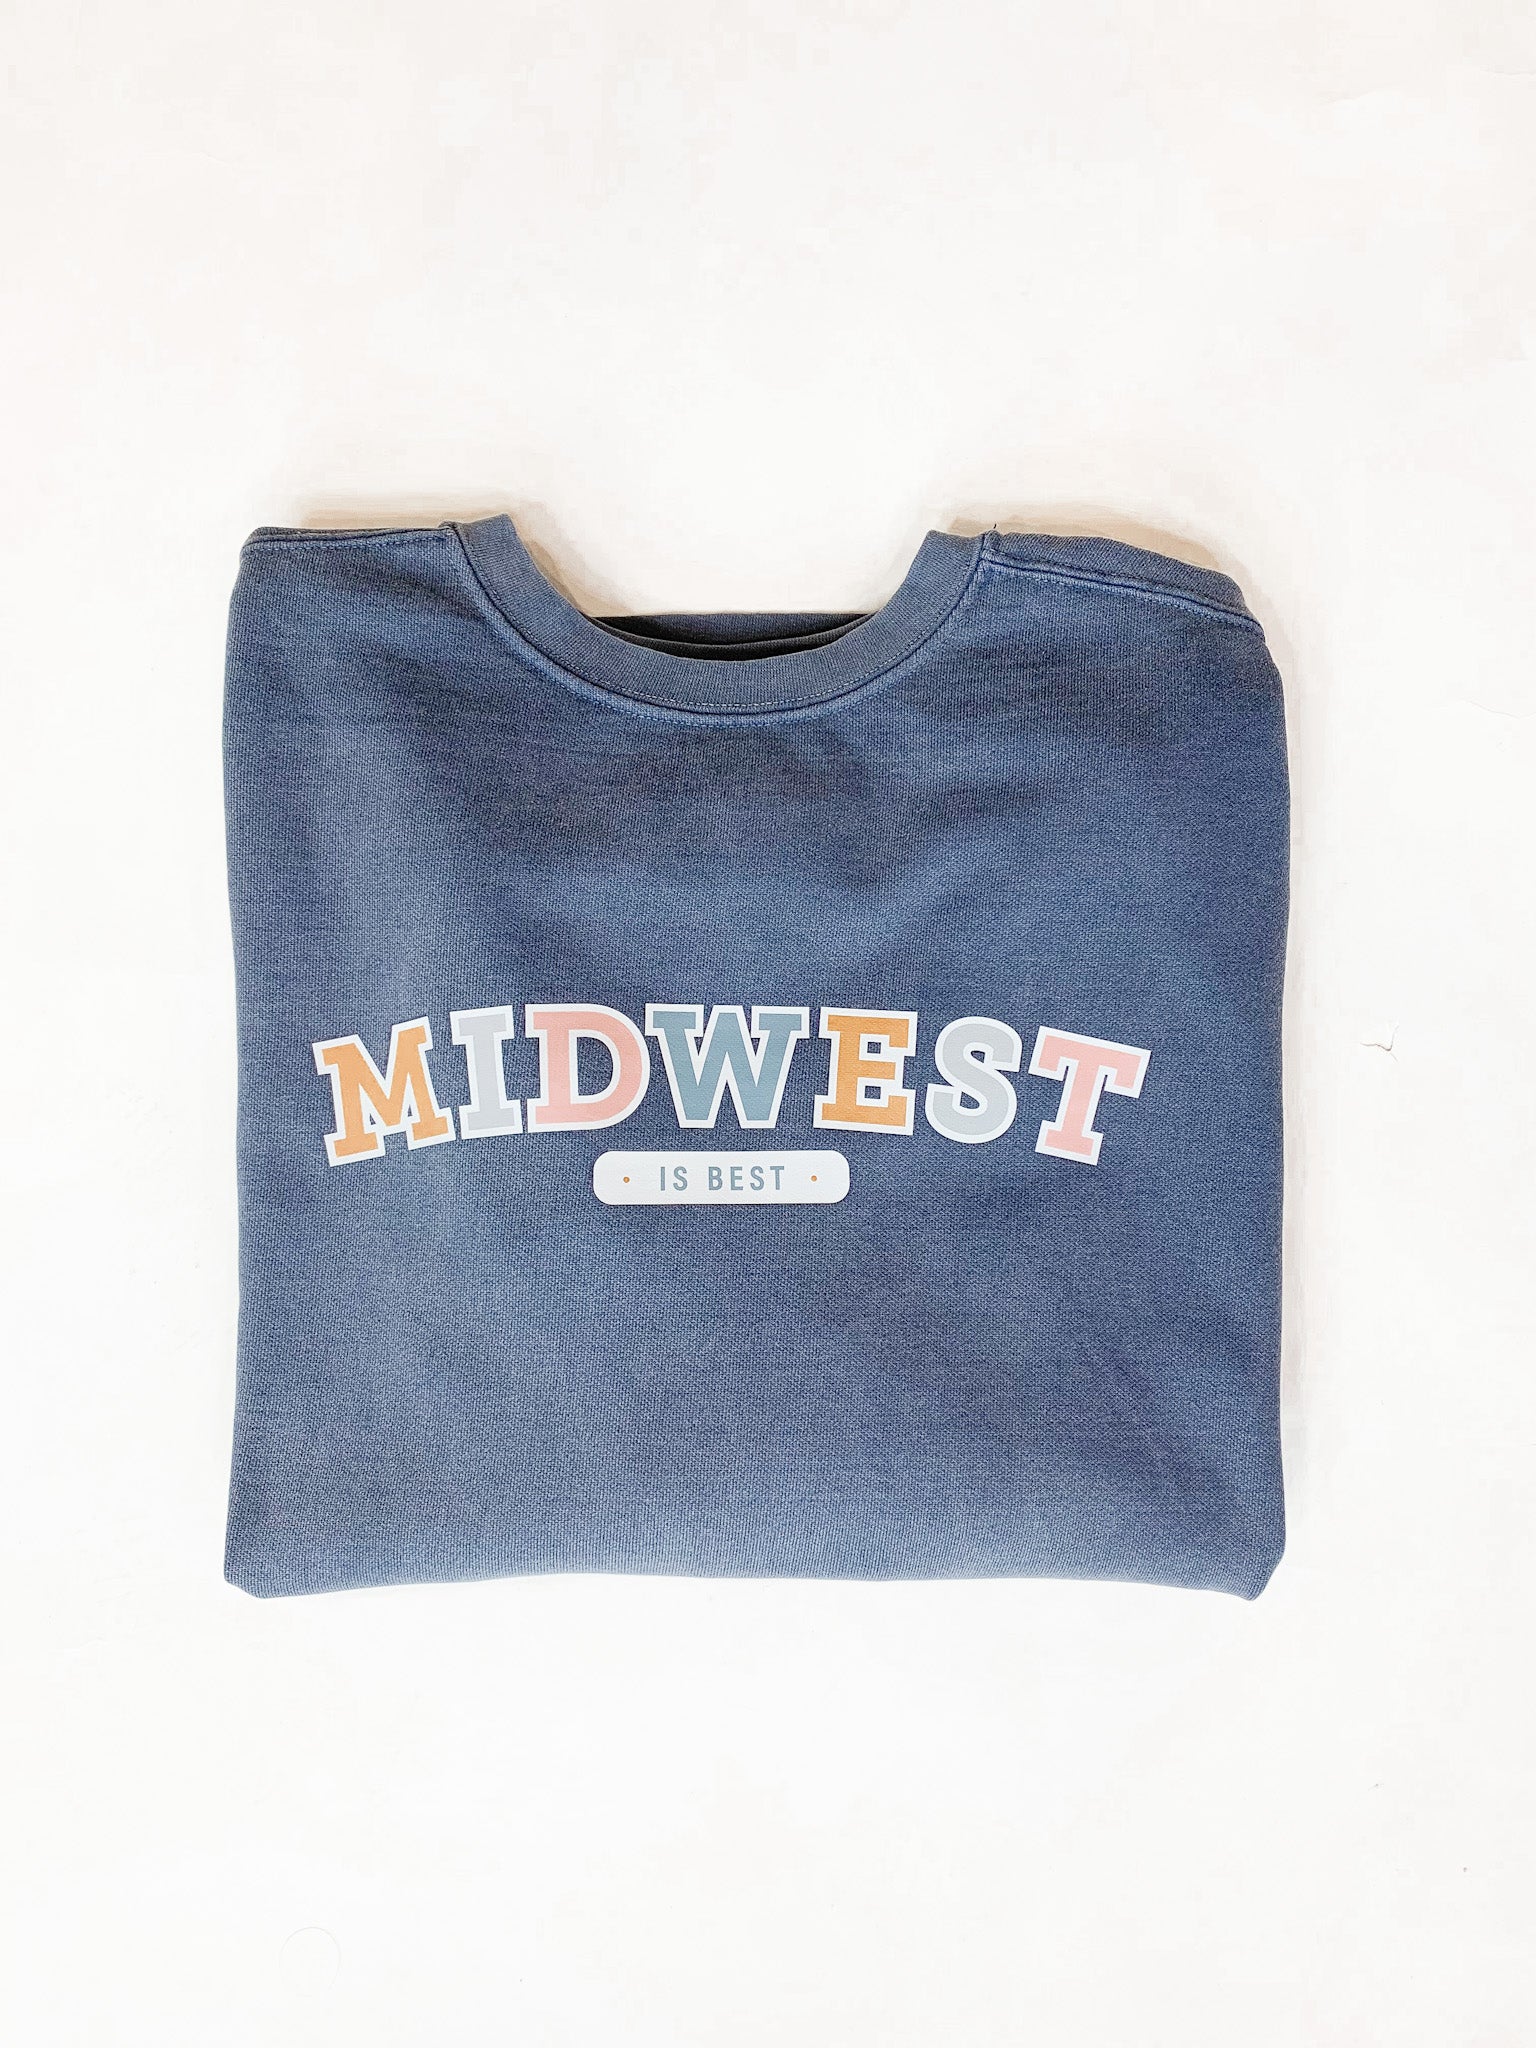 Midwest is Best - Navy